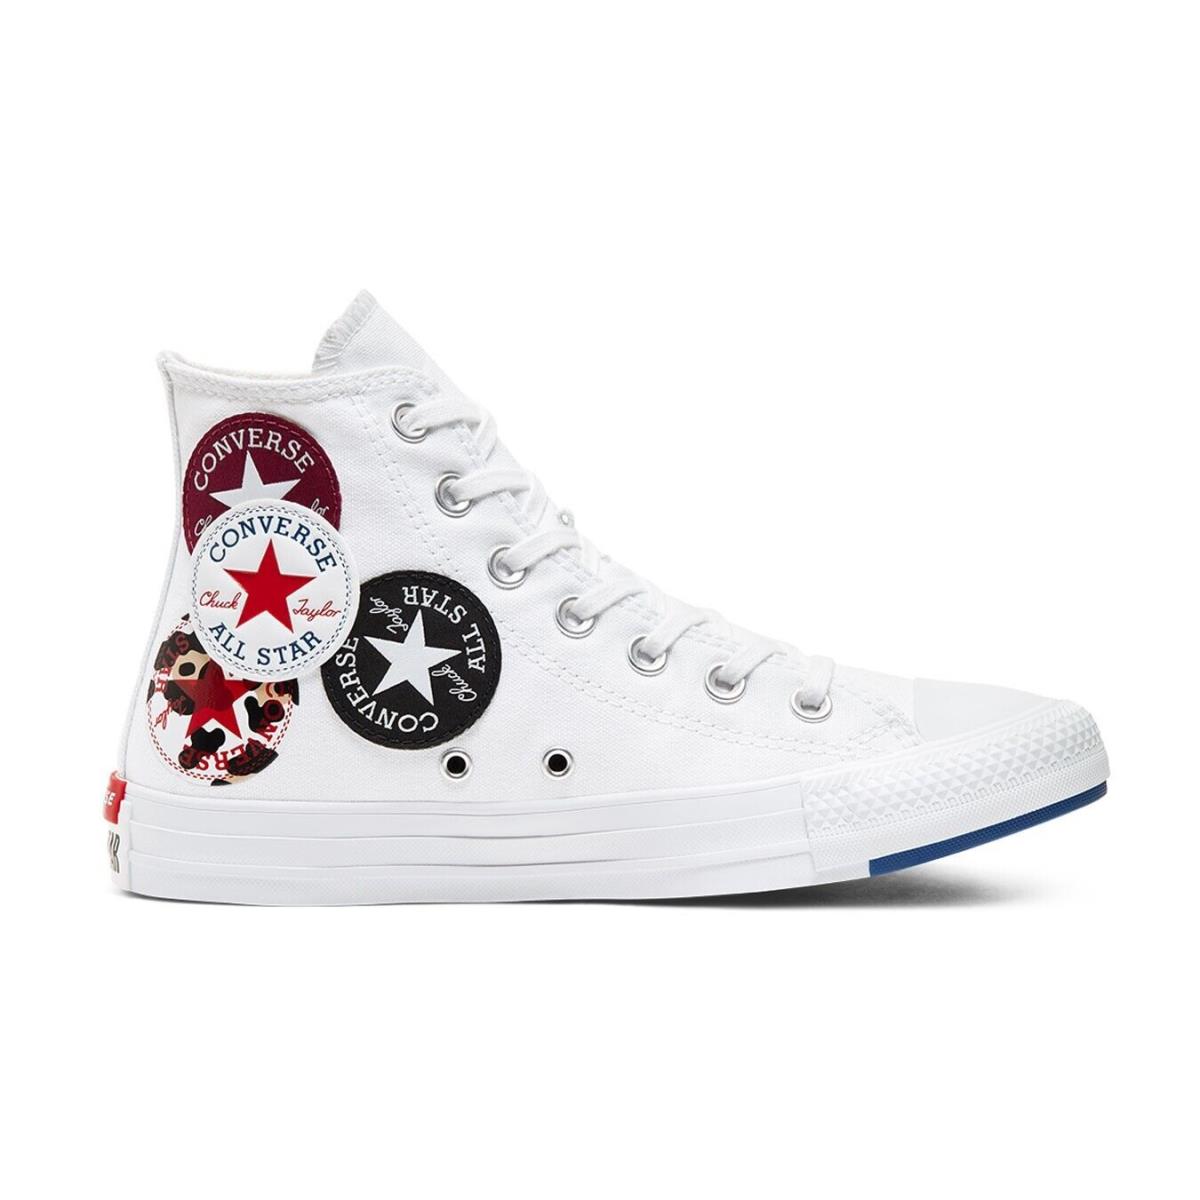 Converse Chuck Taylor All Star 166735C Mens White Sneaker Shoes Size US 6 HS1271